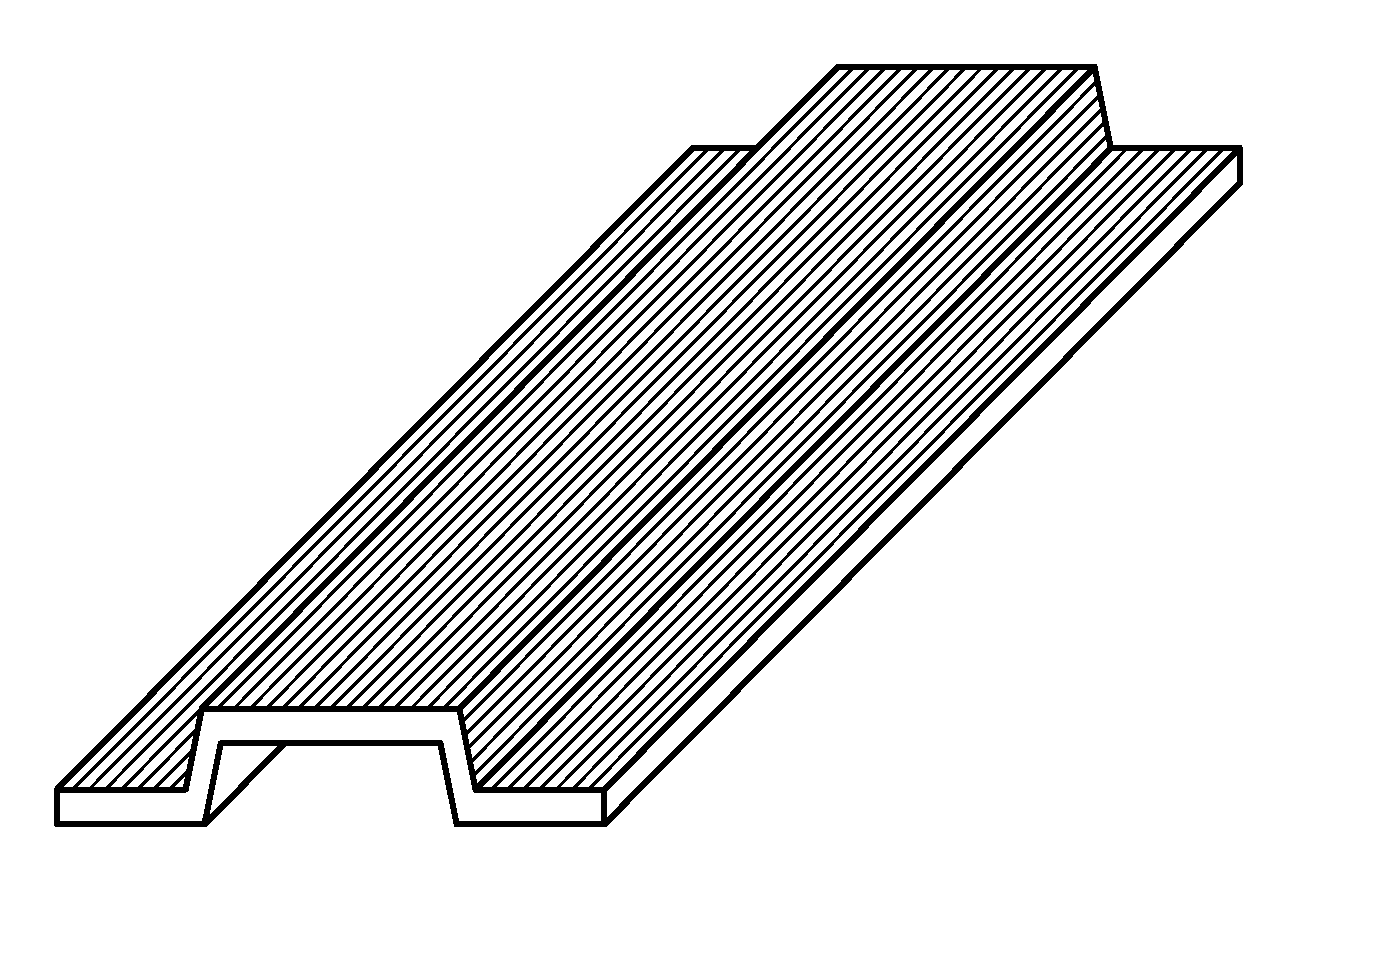 Carbon Fiber Bundle, Method for Producing The Same, and Molded Article Made Thereof